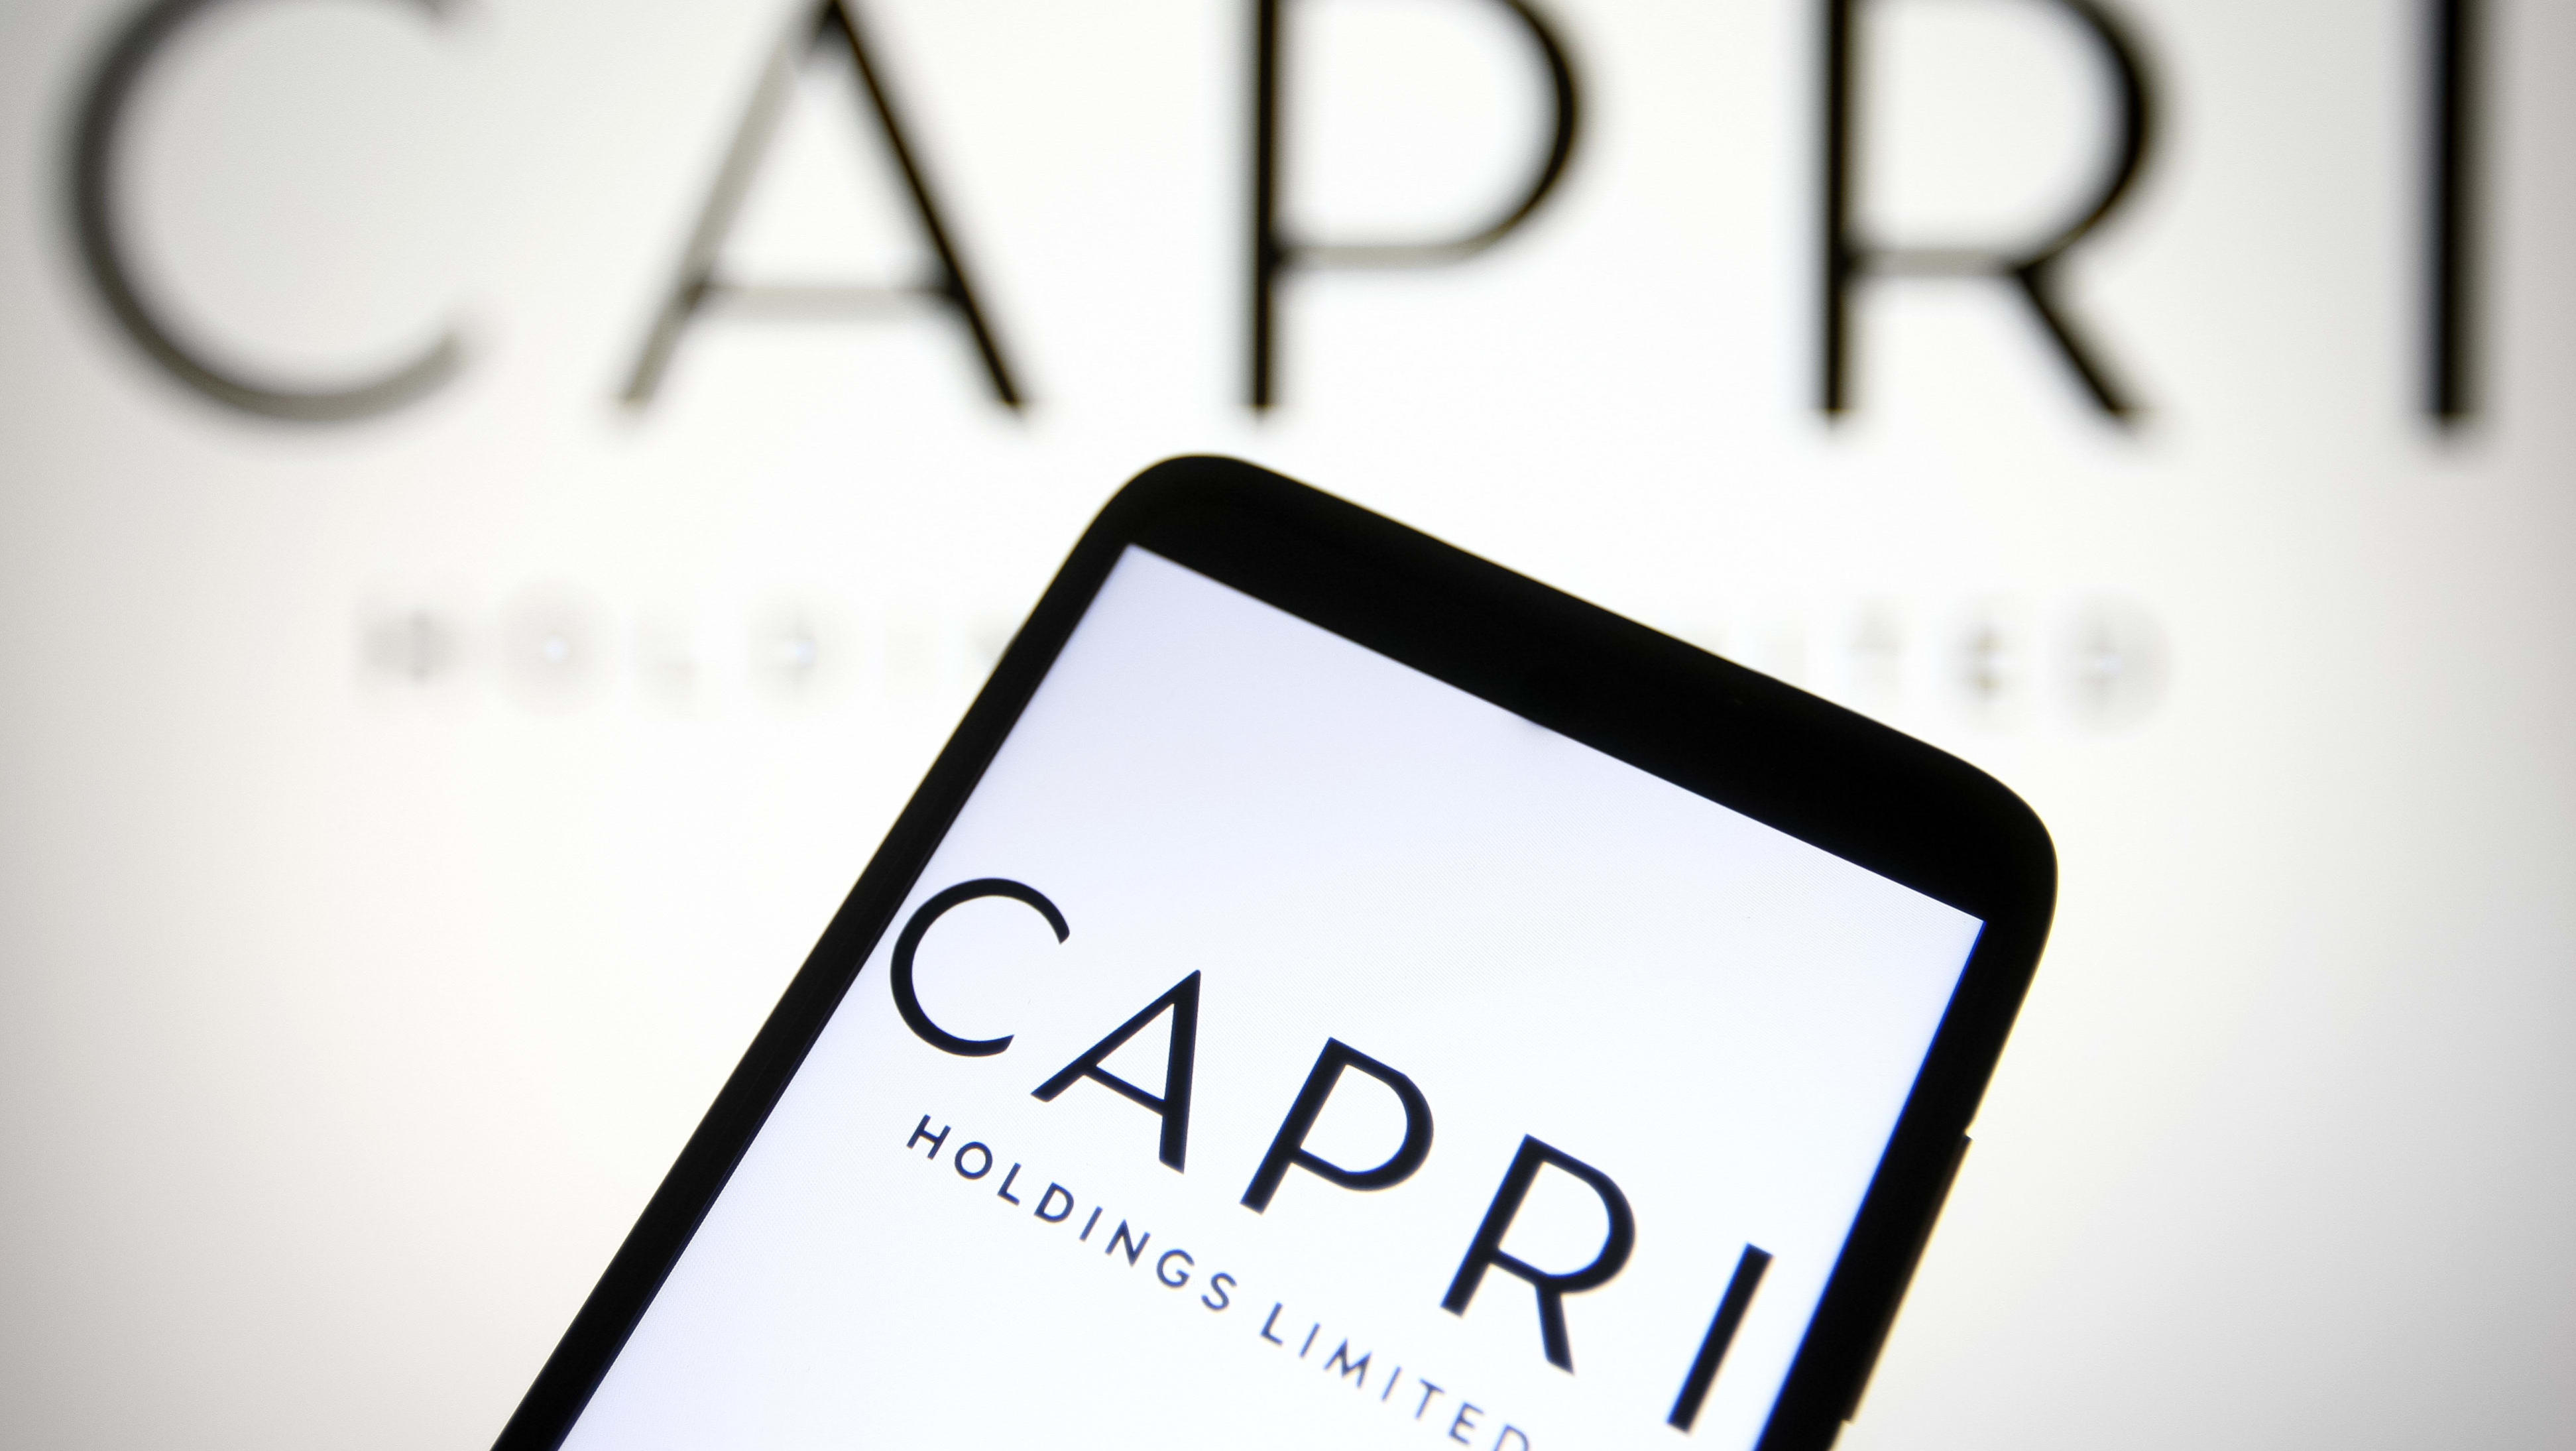 Tapestry Announces Agreement to Acquire Capri Holdings